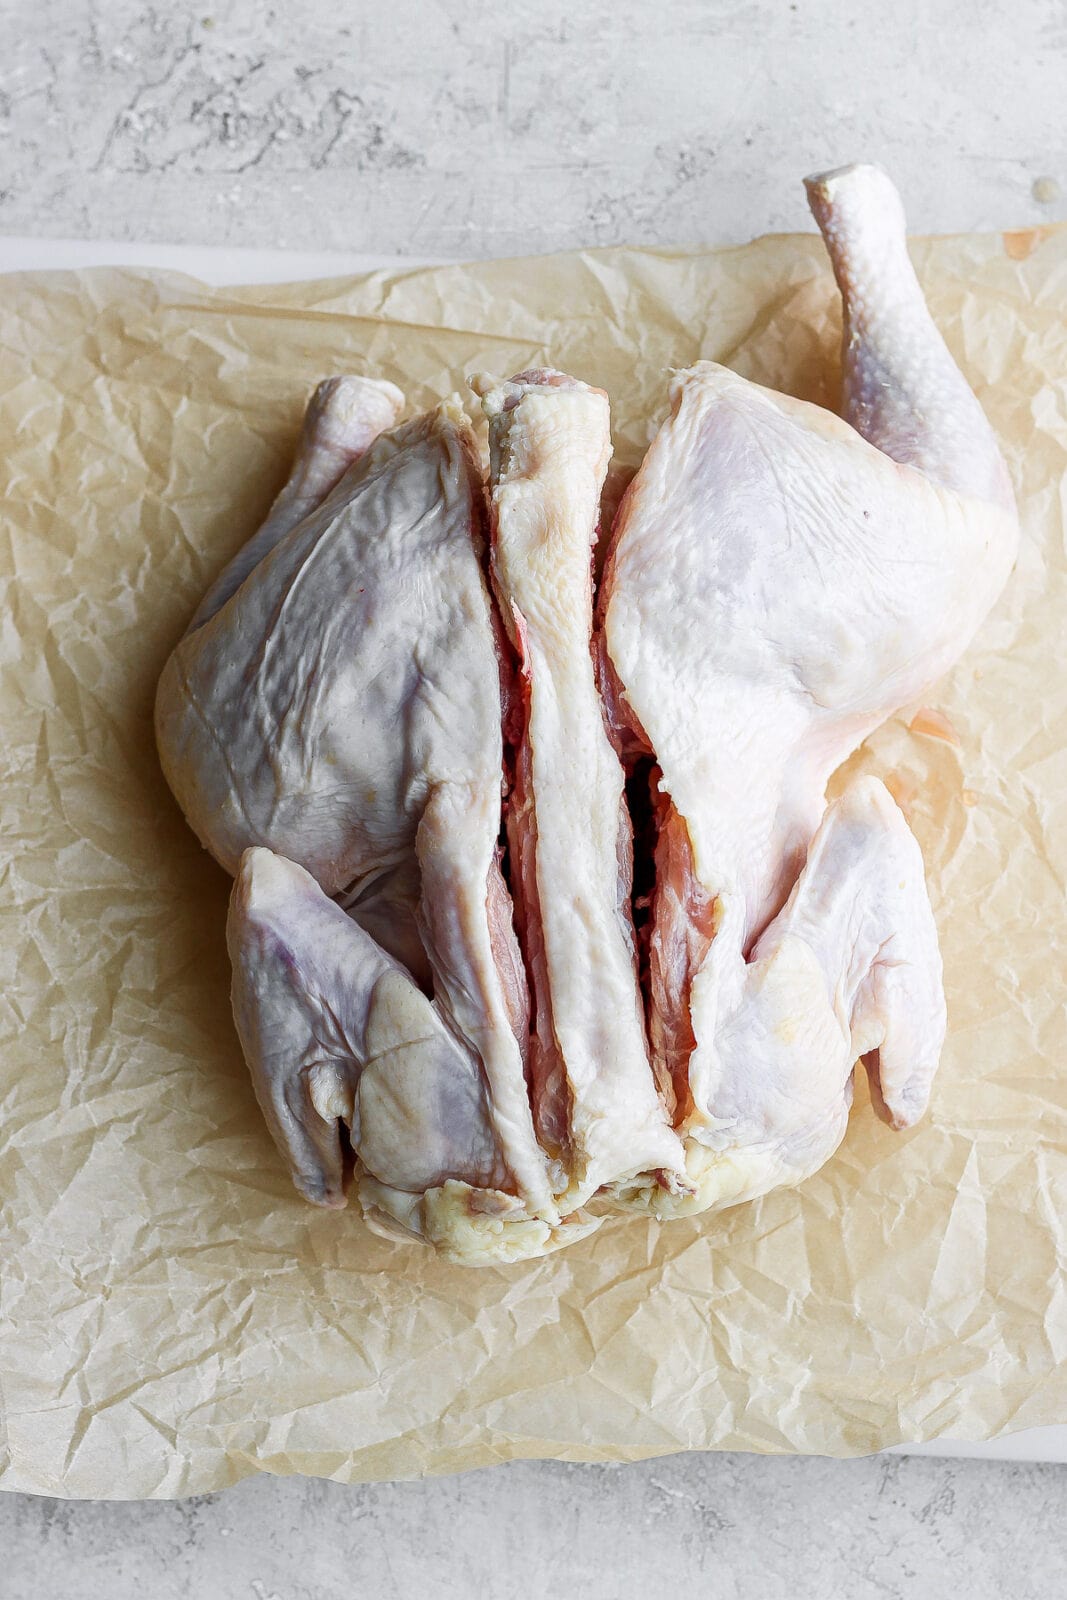 The backbone of the chicken cut along both sides, but still sitting in the chicken. 